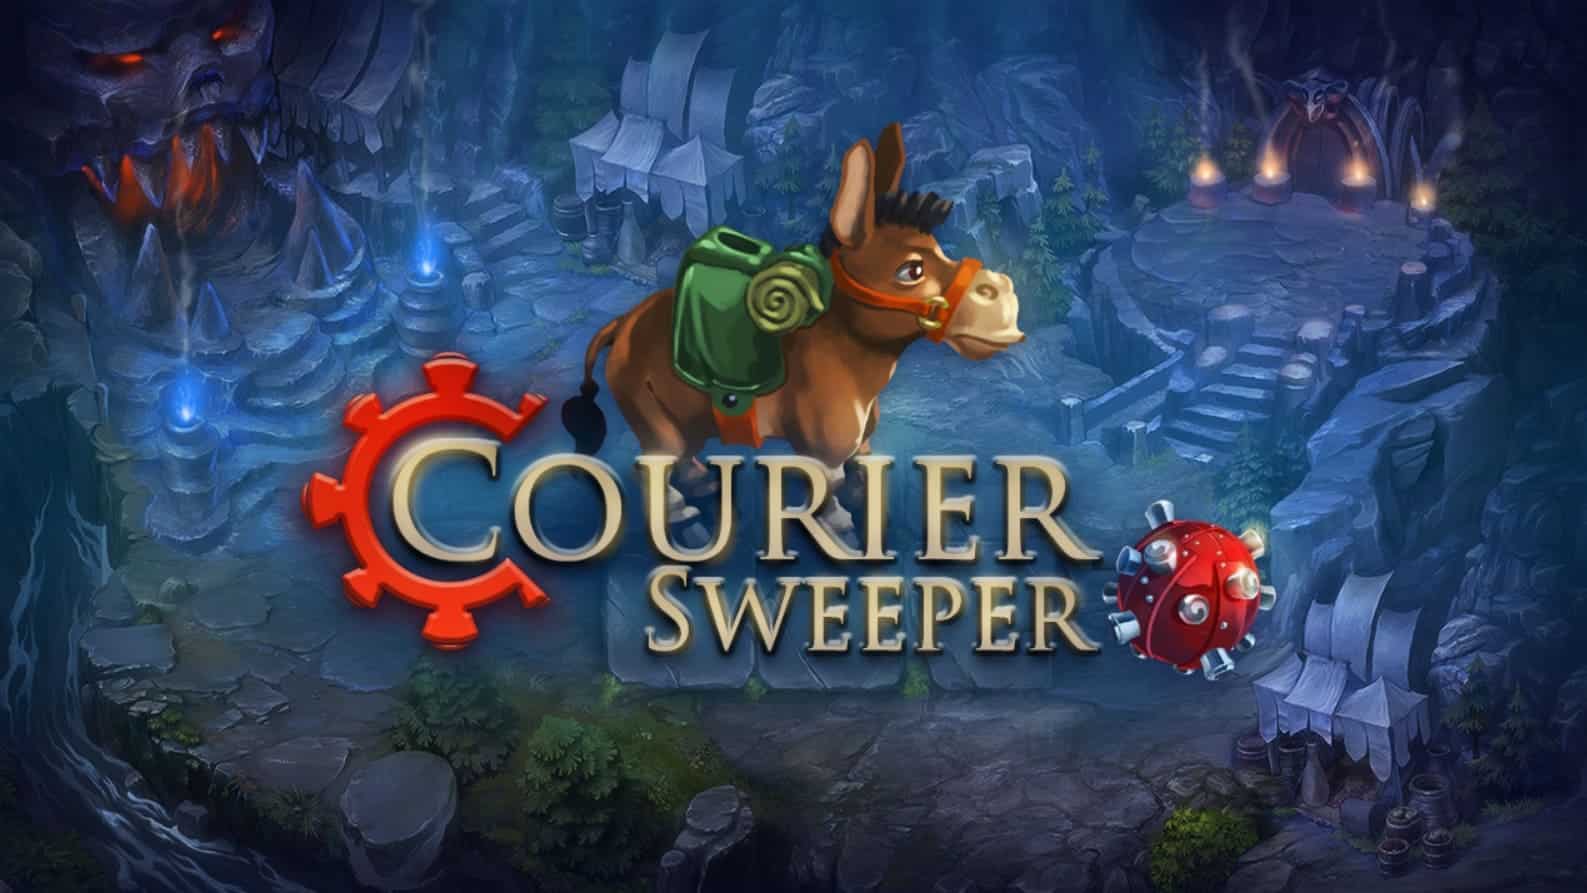 pg_slot-Courier-Sweeper